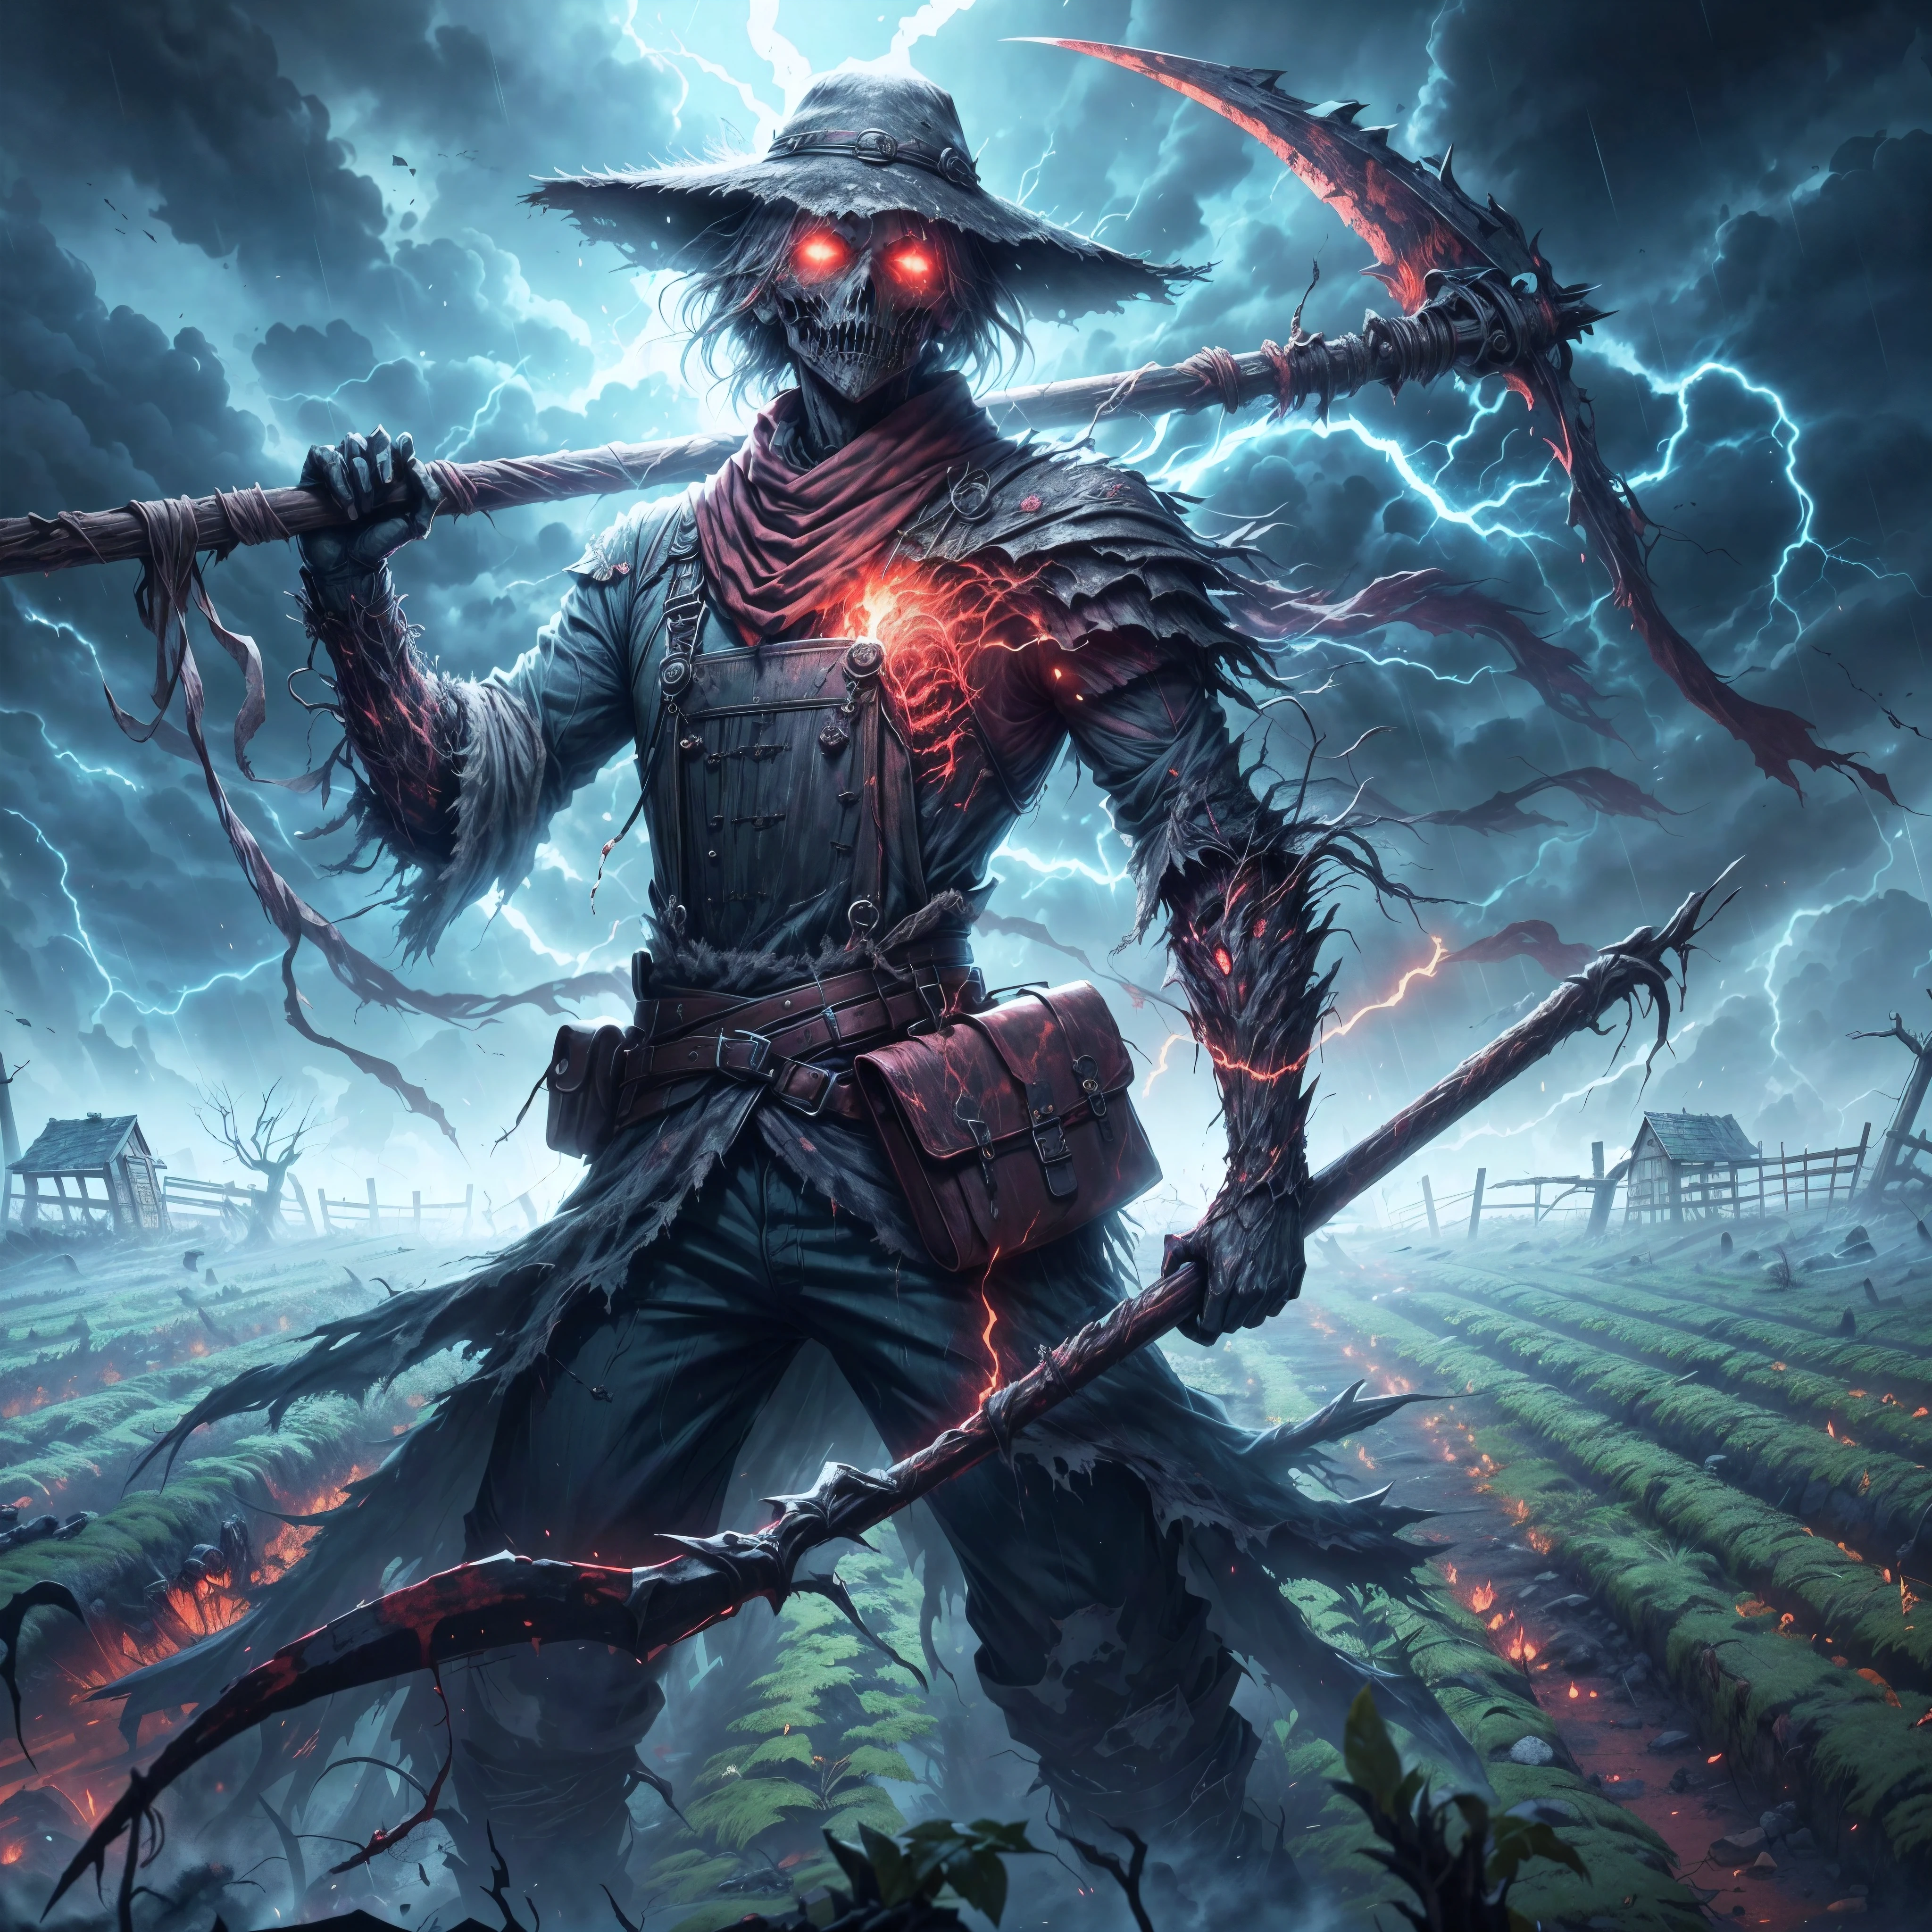 (best quality,4k,8k,highres,masterpiece:1.2),ultra-detailed,realistic:1.37,dark soul boss style,skull face,blood on weapon,blood drop,blood everywhere,Lovecraftian horror,haunted field background,scythe weapon,glowing red eyes,fantasy corrupted farmer outfit,energy cracking around body,battle aura,bloodstained,dynamic lighting,ominous atmosphere,grim and desolate,twisted trees,creepy fog,unsettling shadows,weathered scarecrows,distorted landscapes,haunting whispers,ominous sky,crumbling ruins,ominous storm brewing,lingering sense of darkness,ominous runes,shattered gravestones,mystery and suspense,brutal and intense,dread and fear,gothic elements,oppressive silence,menacing presence,horror-filled ambiance,dark and tormented souls,sinister energy,evoking a sense of doom,nightmare-infused reality